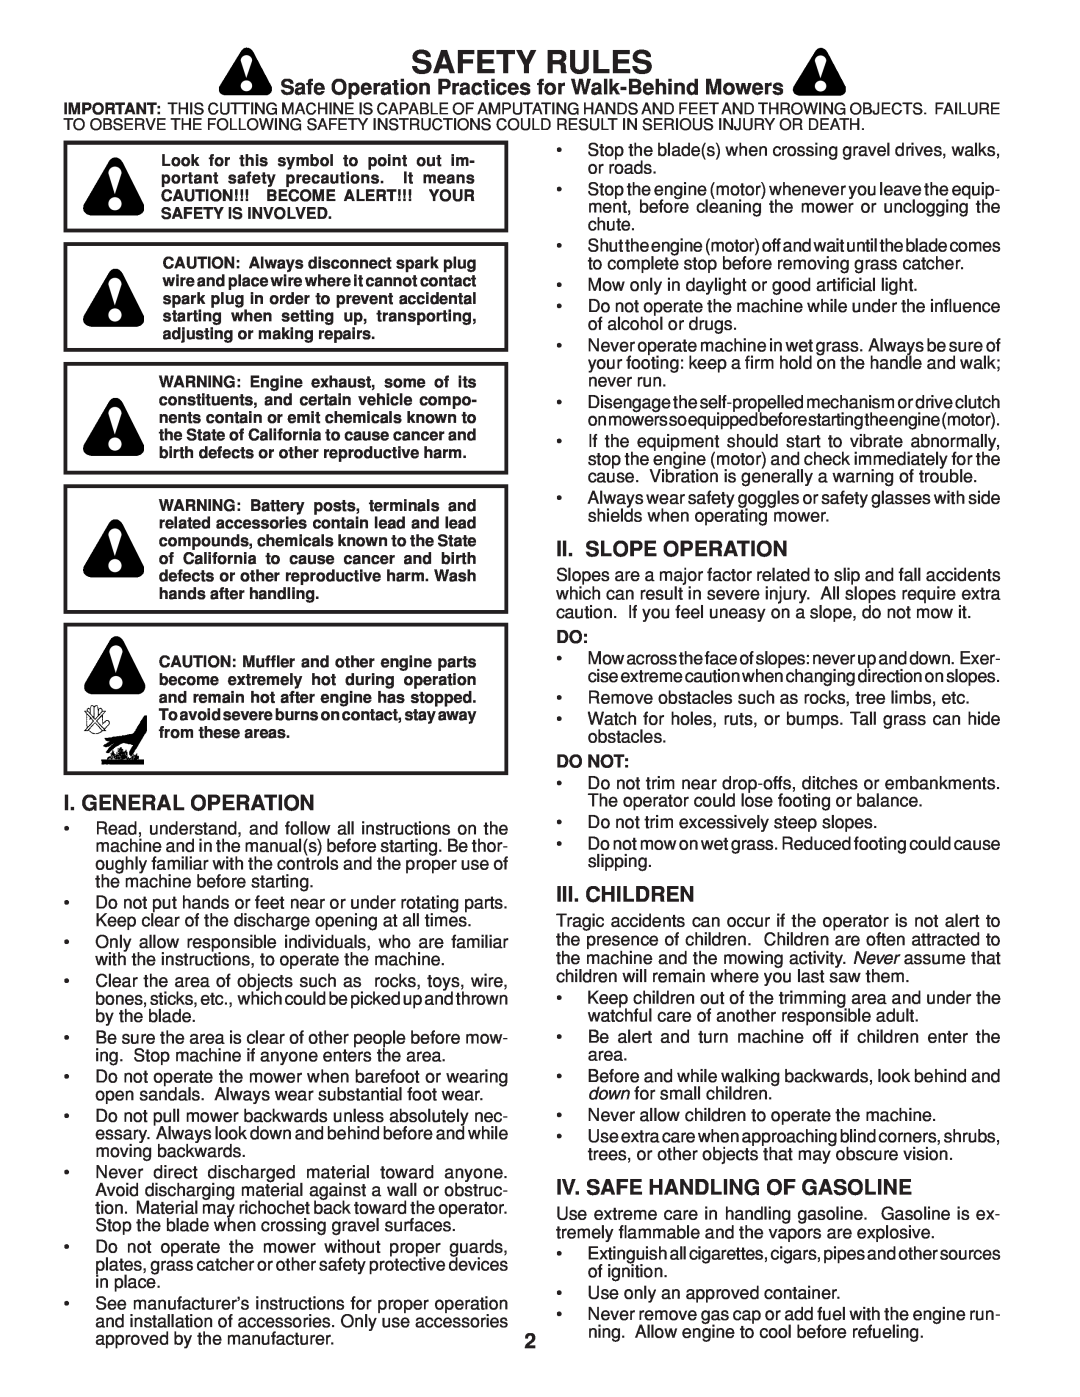 Husqvarna HU800BBC manual Safety Rules, Safe Operation Practices for Walk-Behind Mowers, Ii. Slope Operation, Iii. Children 